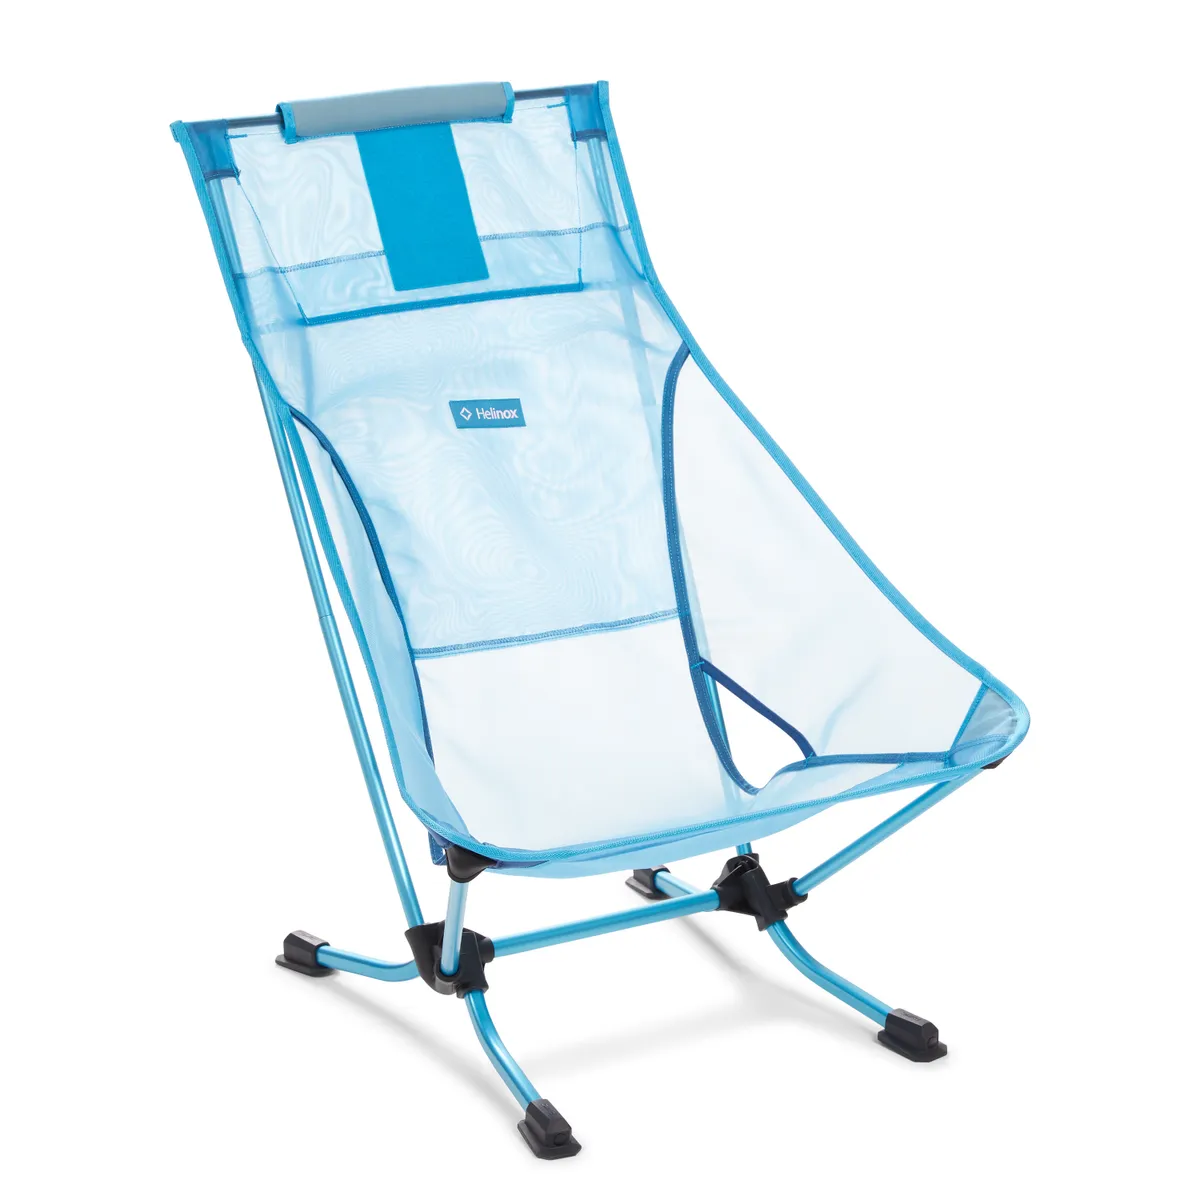 Blue collapsible chair for camping and beach